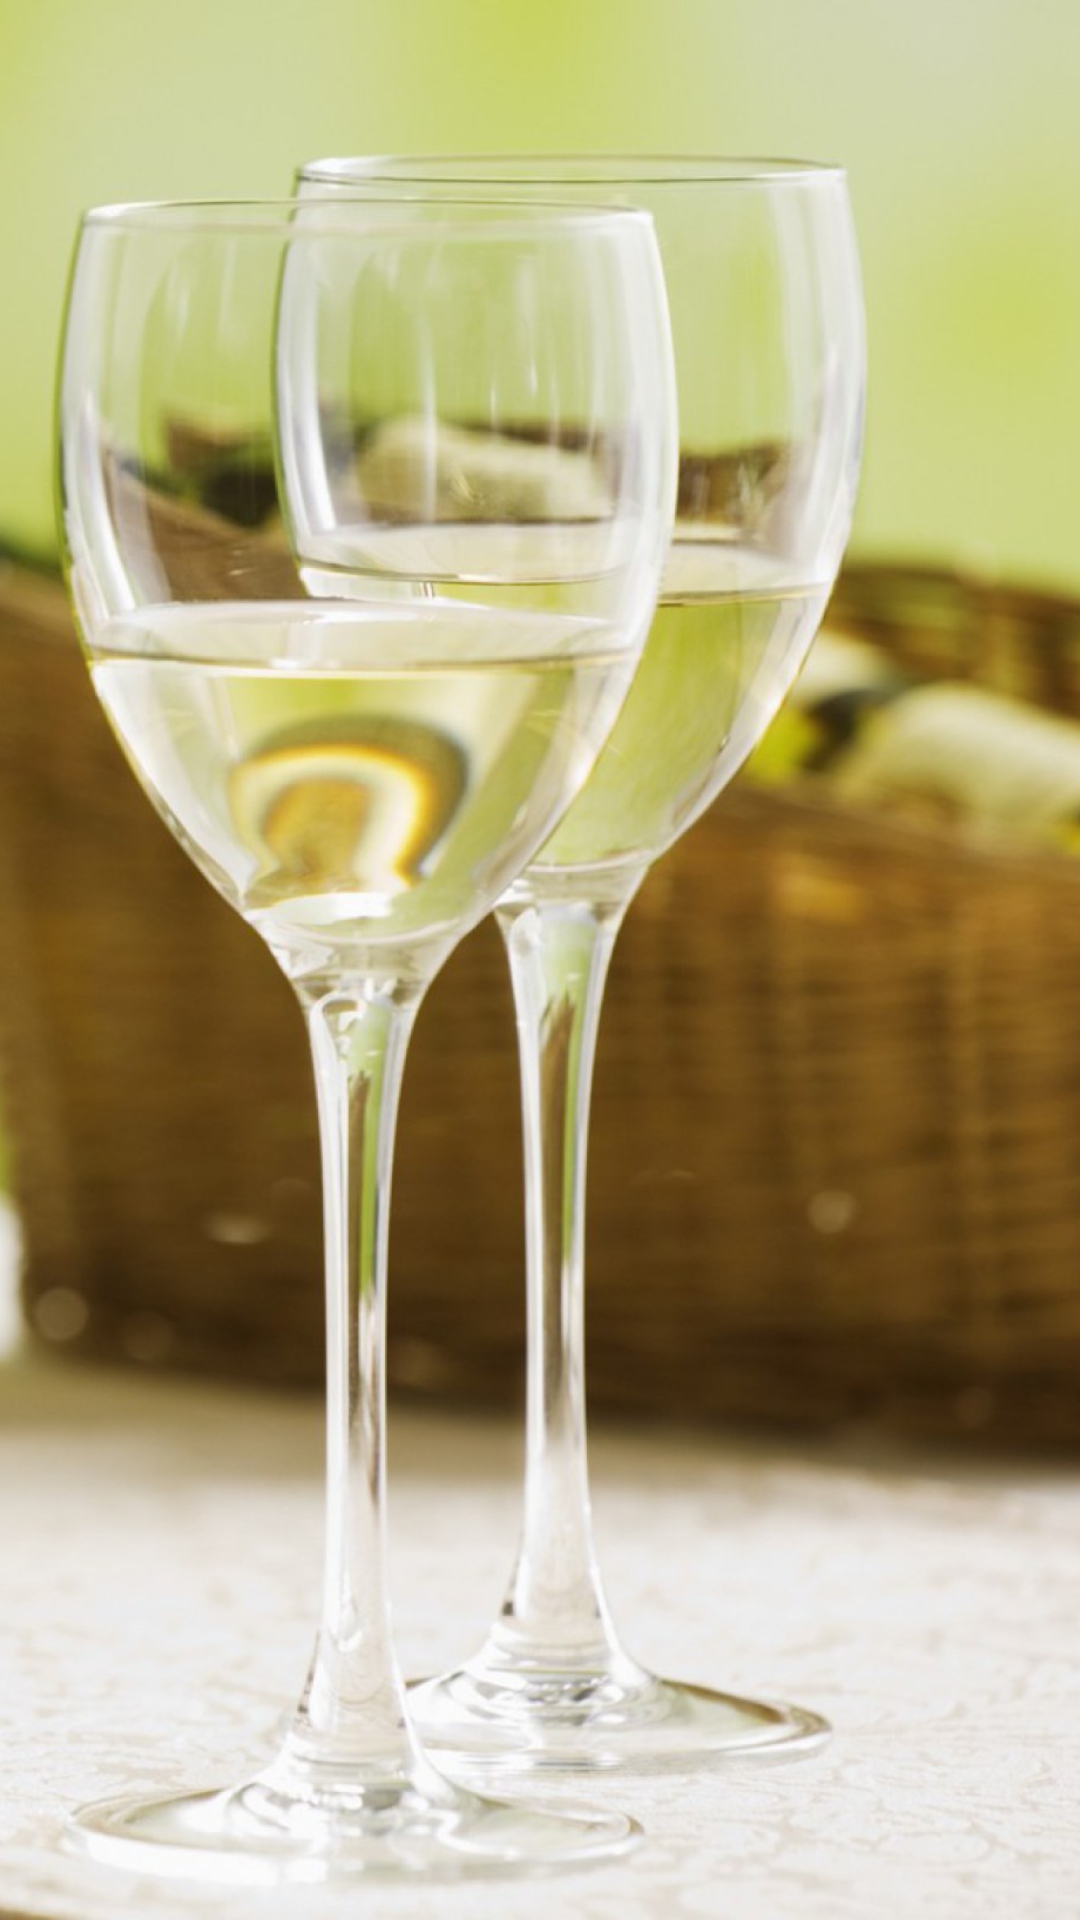 Two Glaeese Of White Wine On Table screenshot #1 1080x1920